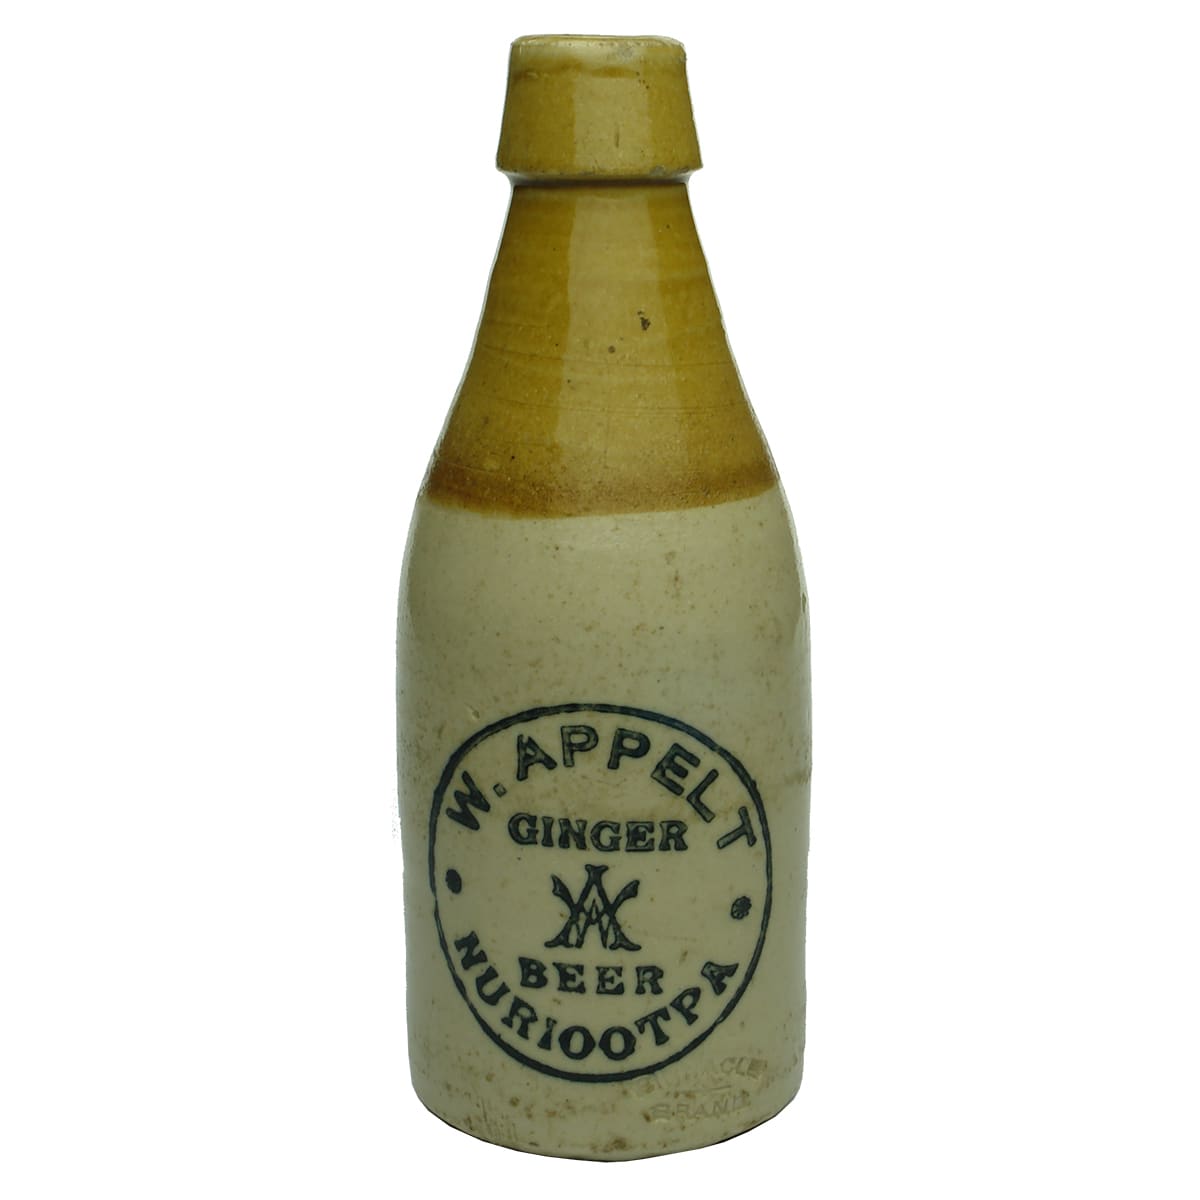 Ginger Beer. W. Appelt, Nuriootpa. Cork stopper. Champagne. Tan top. (South Australia)